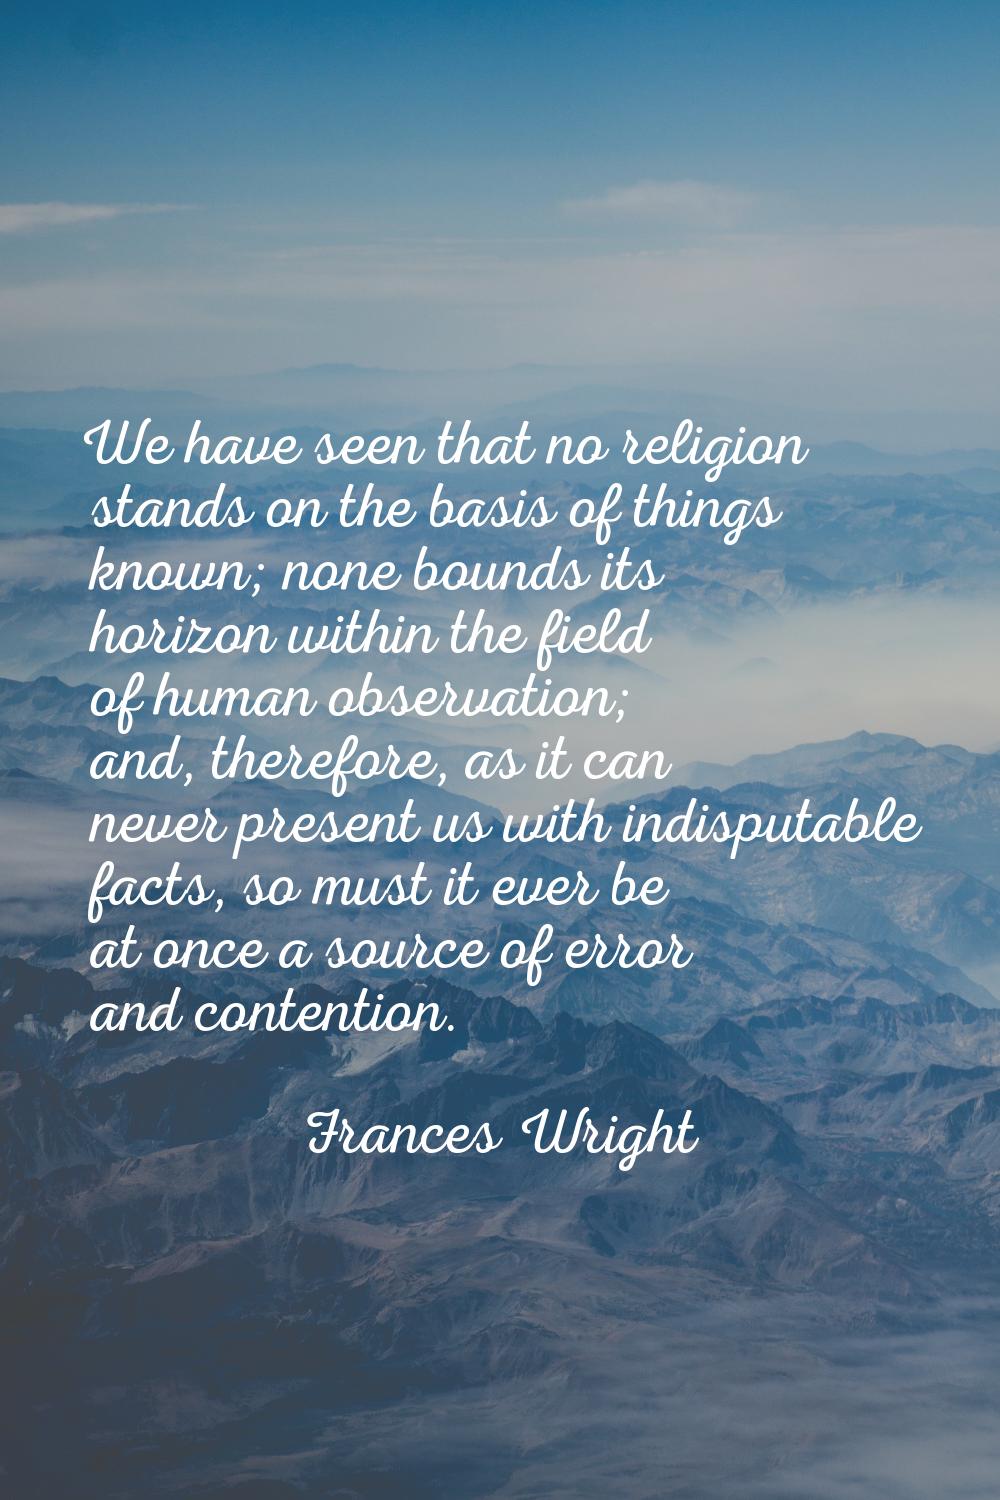 We have seen that no religion stands on the basis of things known; none bounds its horizon within t